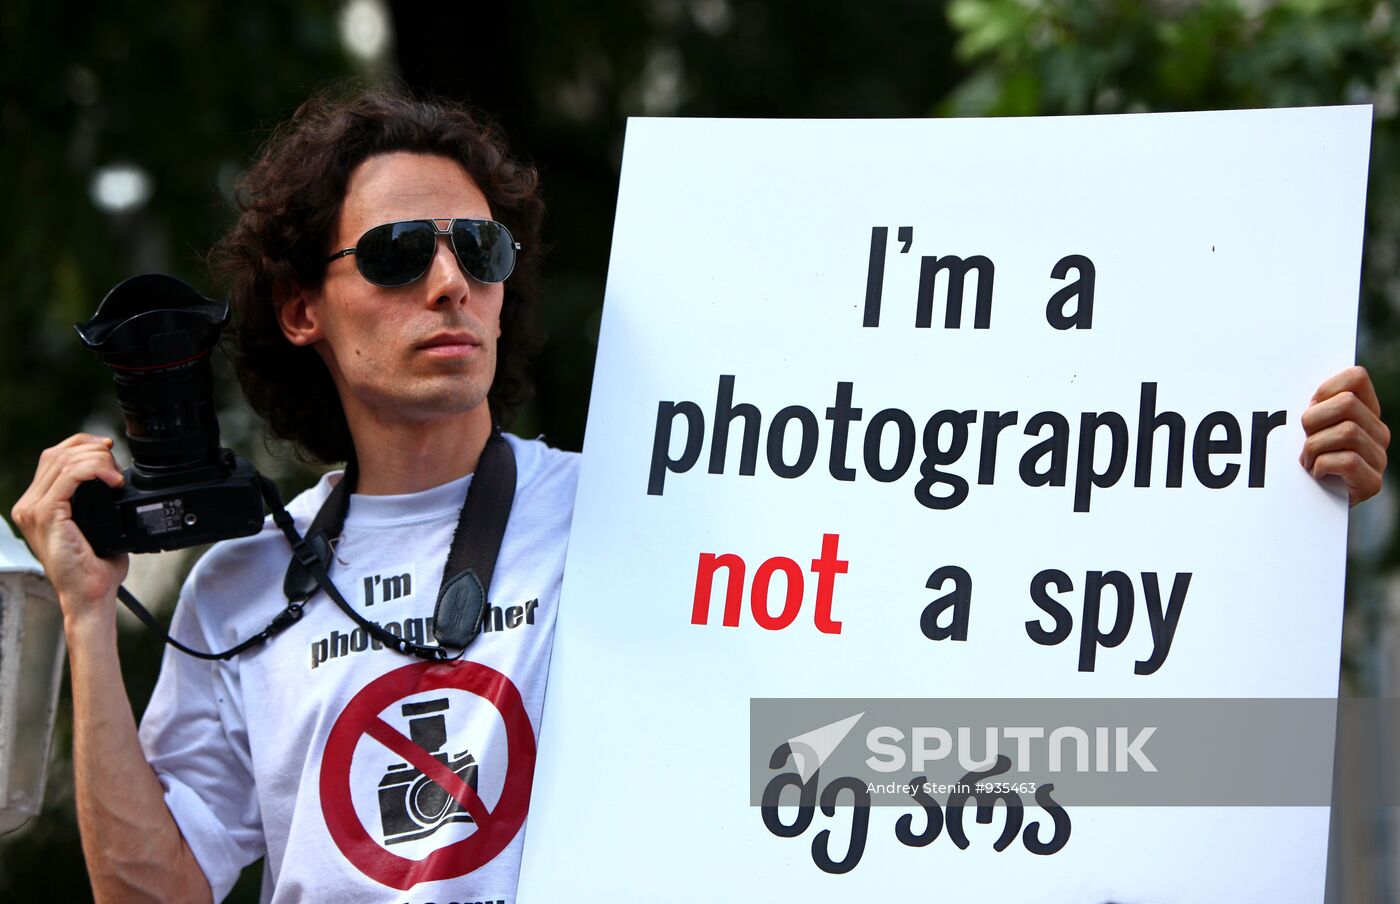 Rally in support of photojournalists arrested in Georgia